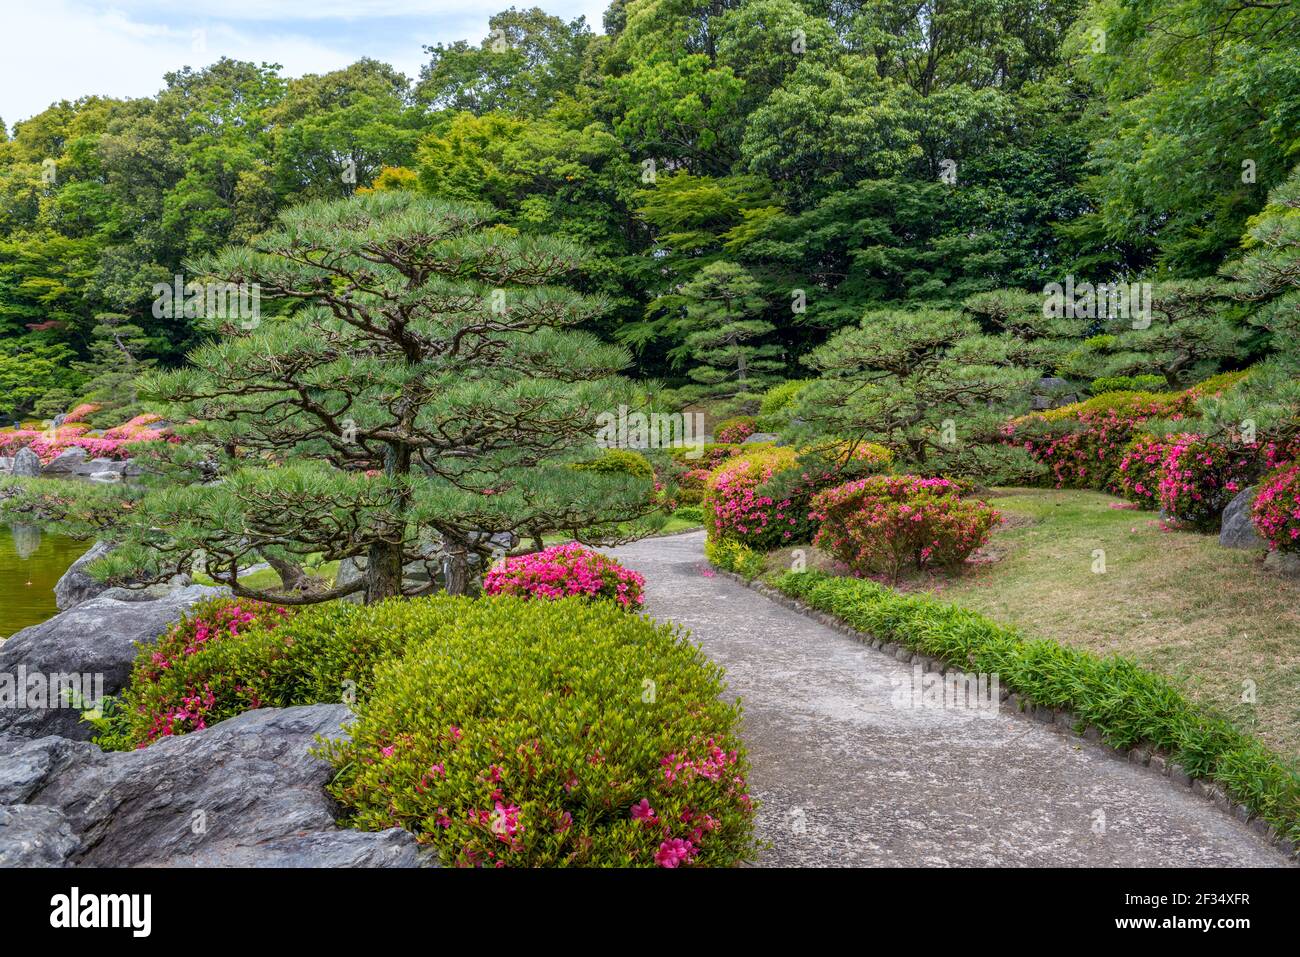 Footpath in a beautiful Japanese garden with pine trees and flowers Stock Photo